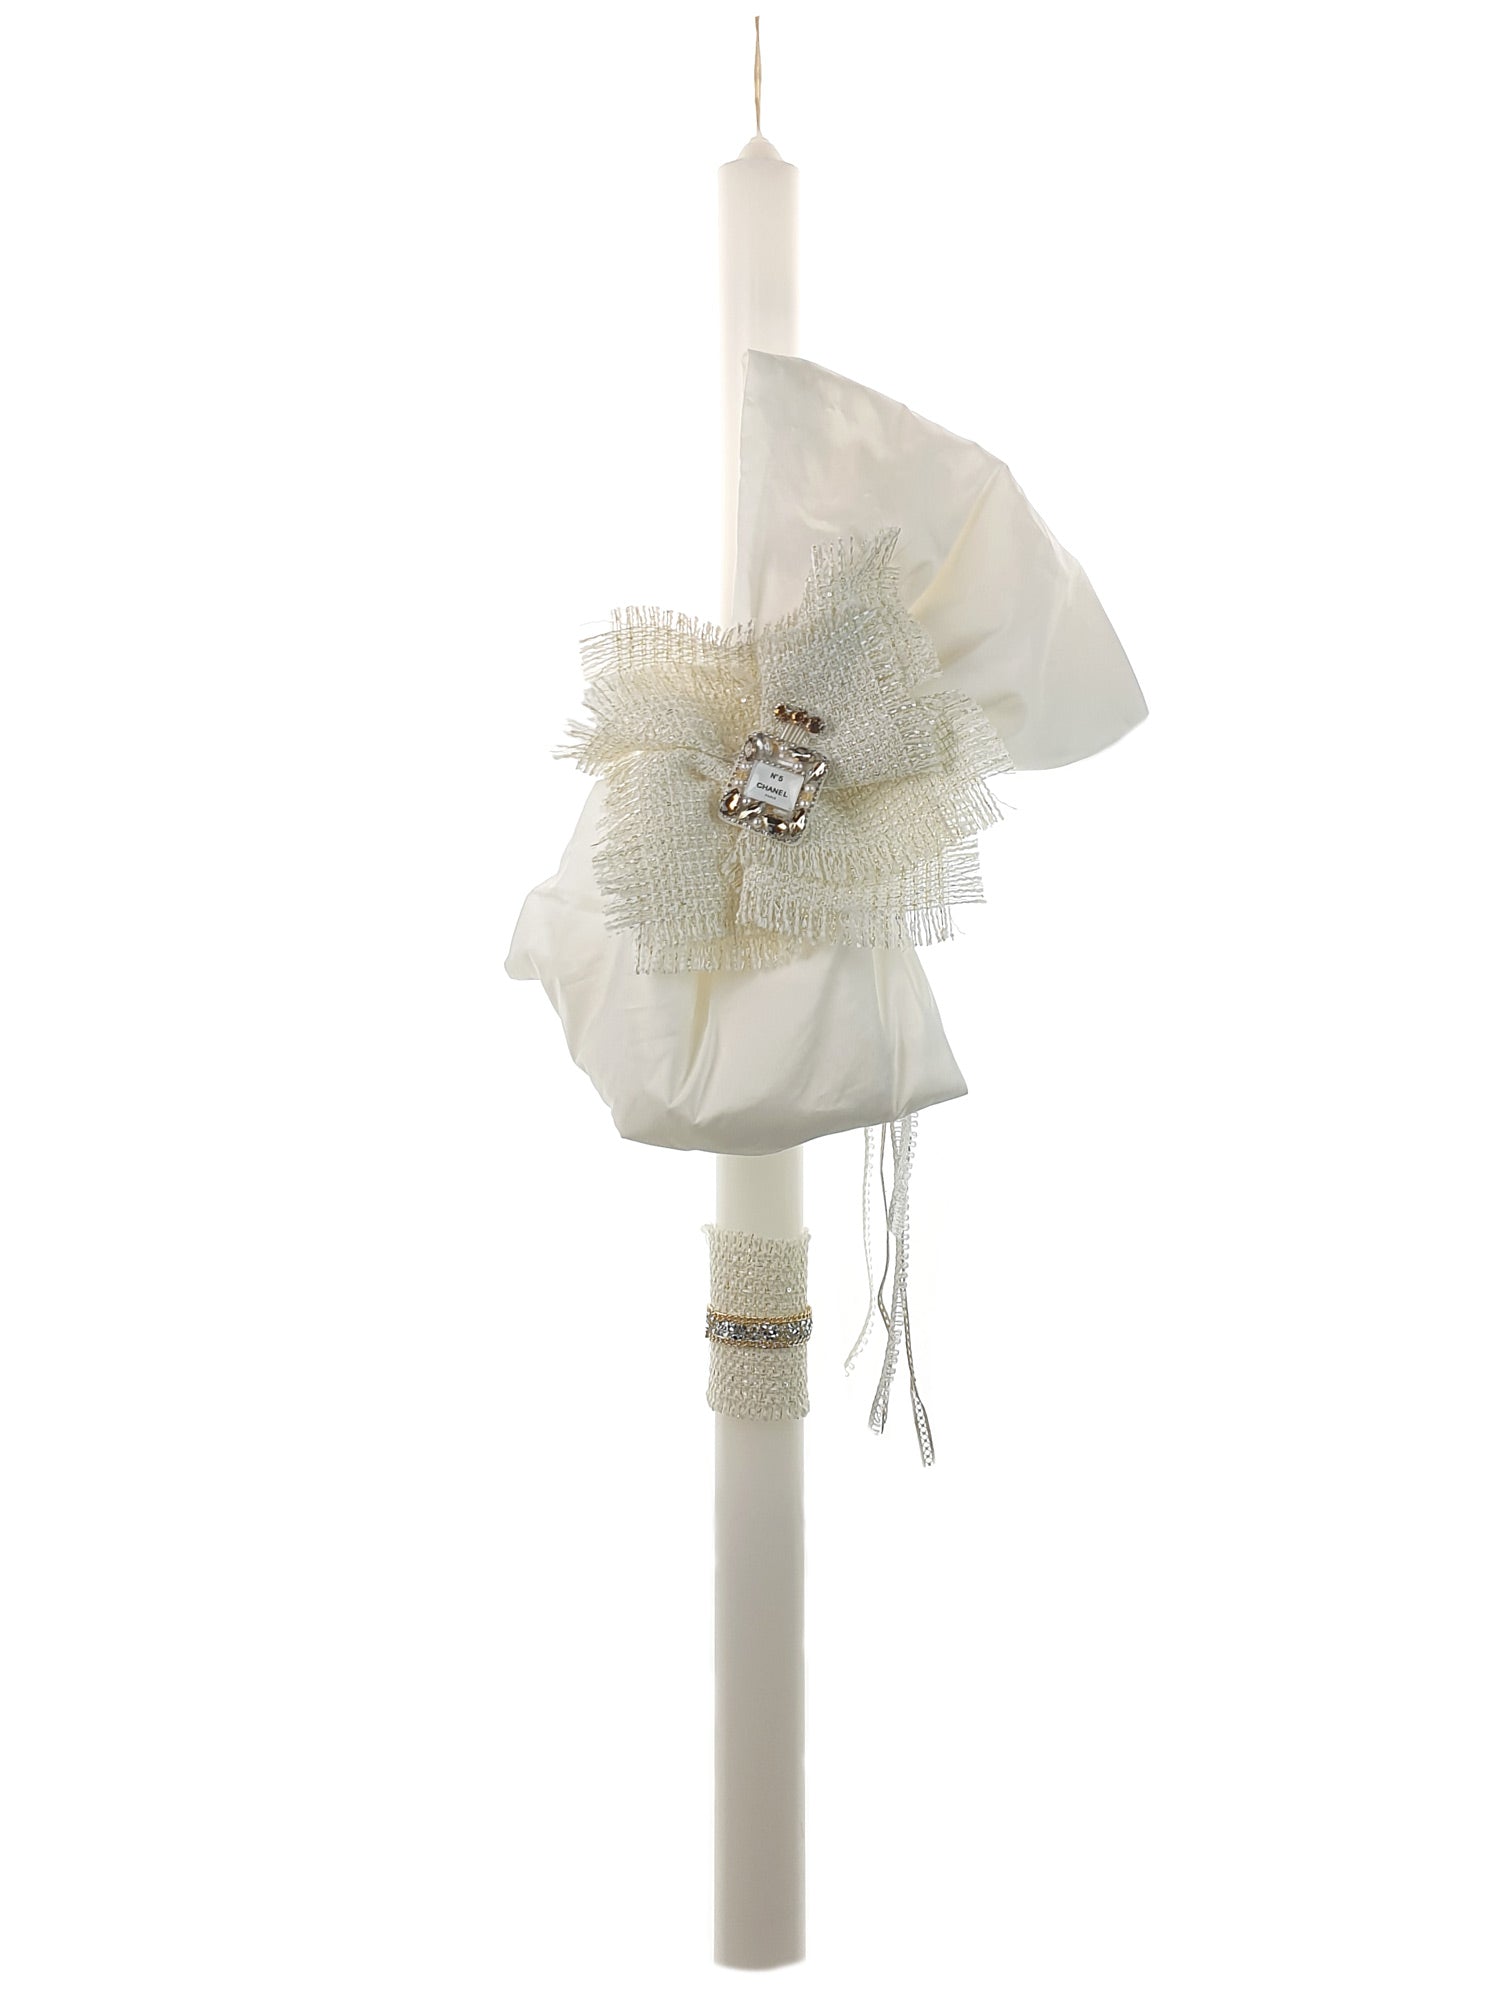 Christening candle with applique decorative-CHANEL